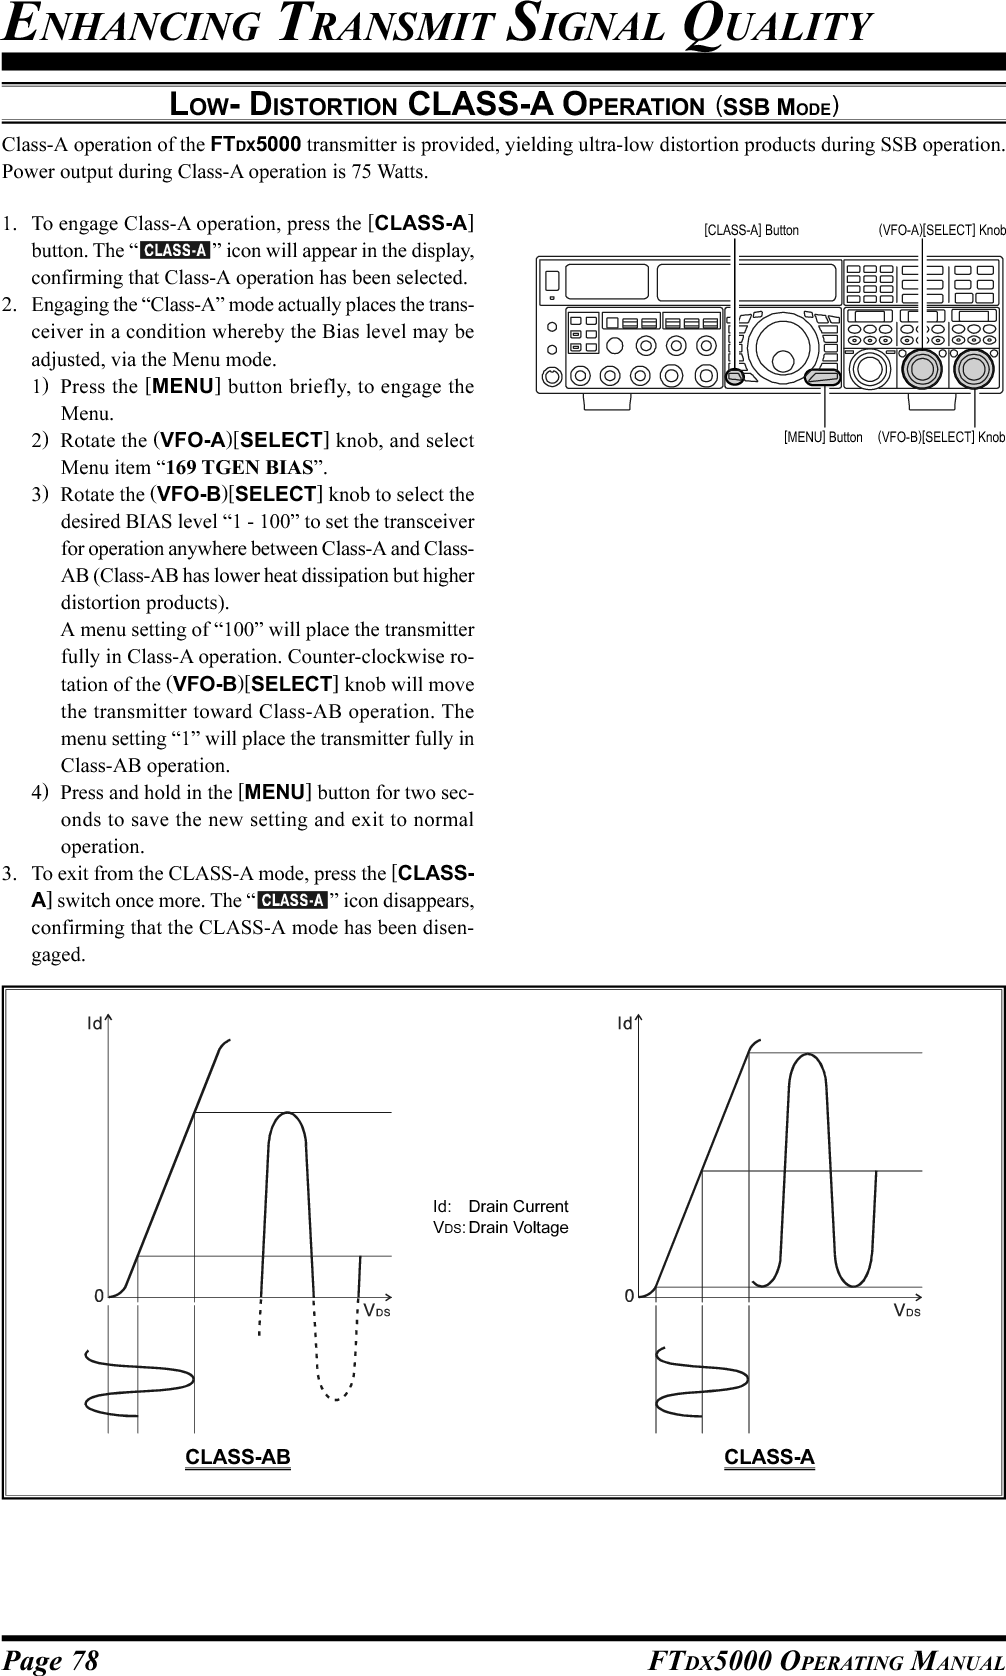 Page 79FTDX5000 OPERATING MANUALENHANCING TRANSMIT SIGNAL QUALITYADVICEDuring Class-A operation, 10-Amps of Bias current will be flowing, regardless of the modulation level that leads toactual power output. Therefore, if the ambient temperature in your operation location is high, the transceiver tempera-ture may rise as well, due to the high bias level (which must be dissipated as heat). Depending on the temperature, youmay wish to reduce the BIAS level using menu item “169 TGEN BIAS”, to reduce the amount of heat being generated.When the optional DMU-2000 Data Management Unit and a video monitor are connected, you can monitor the heatsink temperature on the video monitor; thus, you can always be aware of a rise in temperature during Class-A operation.Normally, the temperature is below 80 °C. If the temperature rises to near or above this value, however, we recommendyou adjust the BIAS level toward Class-AB via menu item “169 TGEN BIAS” (decrease the numerical value to reducethe heat being dissipated).An innovative aspect of the “Class-A” mode is that the actual power output is always limited to 75 Watts. So eventhough you might adjust the BIAS in the direction of Class-AB operation, the power output will not rise; this eliminatesthe need to re-tune your linear amplifier, if used.QUICK POINTClass-A operation provides a significant improvement in transmitter distortion suppression. During Class-A operation,the 3rd-order IMD products are typically suppressed 45 dB. The 5th- and higher-order IMD products that can cause“splatter” and interfere with others, will typically be suppressed 70 dB or more.If you are using a linear amplifier such as the VL-1000, the low distortion produced by the FTDX5000’s transmittermeans these intermodulation distortion products will not exist to be amplified by your linear.LOW- DISTORTION CLASS-A OPERATION (SSB MODE)The High-Power 200-Watt Final Amplifier Stage of the FTDX5000 utilizes a pair of ST Micro Electronics Corp. SD2931MOSFET devices operating at 50 Volts. The push-pull configuration provides low distortion along with high poweroutput. The 92 mm thermostatically-controlled cooling fan directs forced air across the heat sink, when triggered by arise in heat sink temperature.Class-AB 200W PEP IMDClass-A 75W PEP IMD